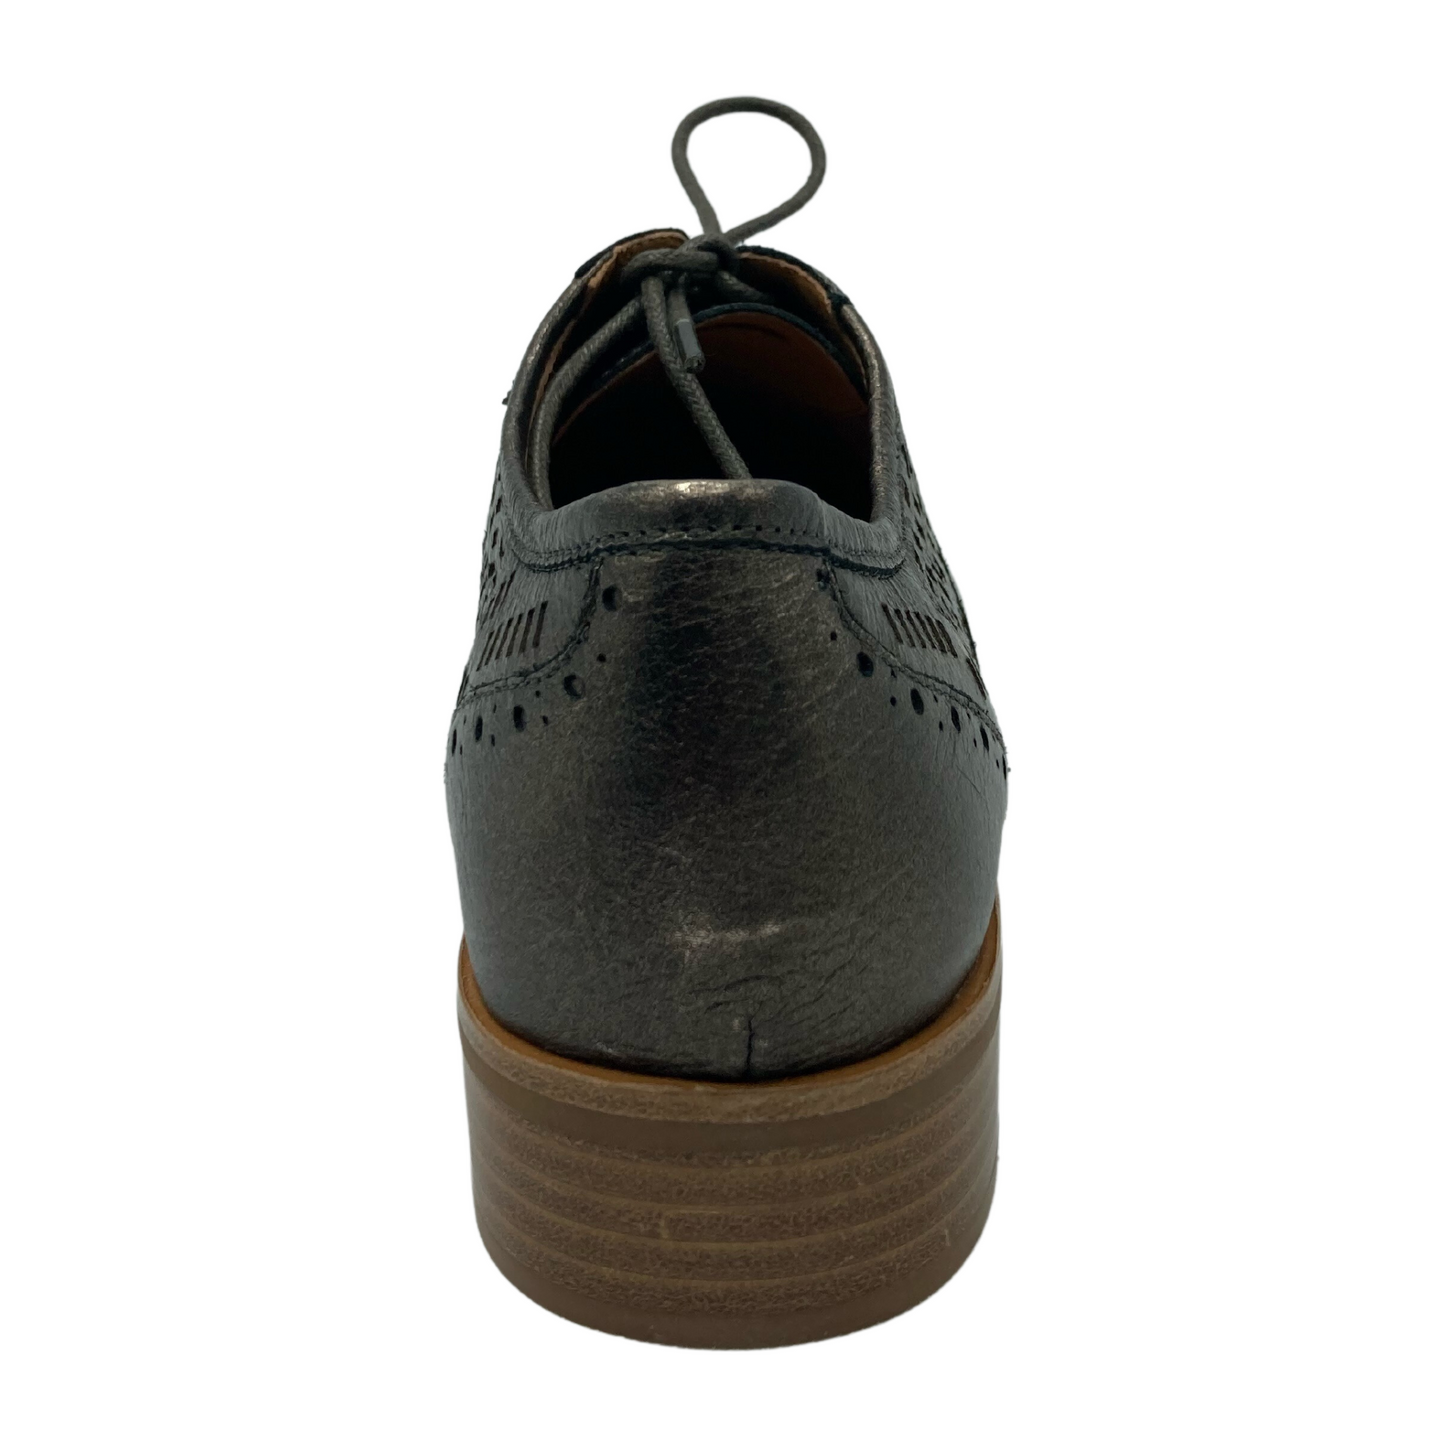 Heel view of back of leather shoe with brown sole and matching laces